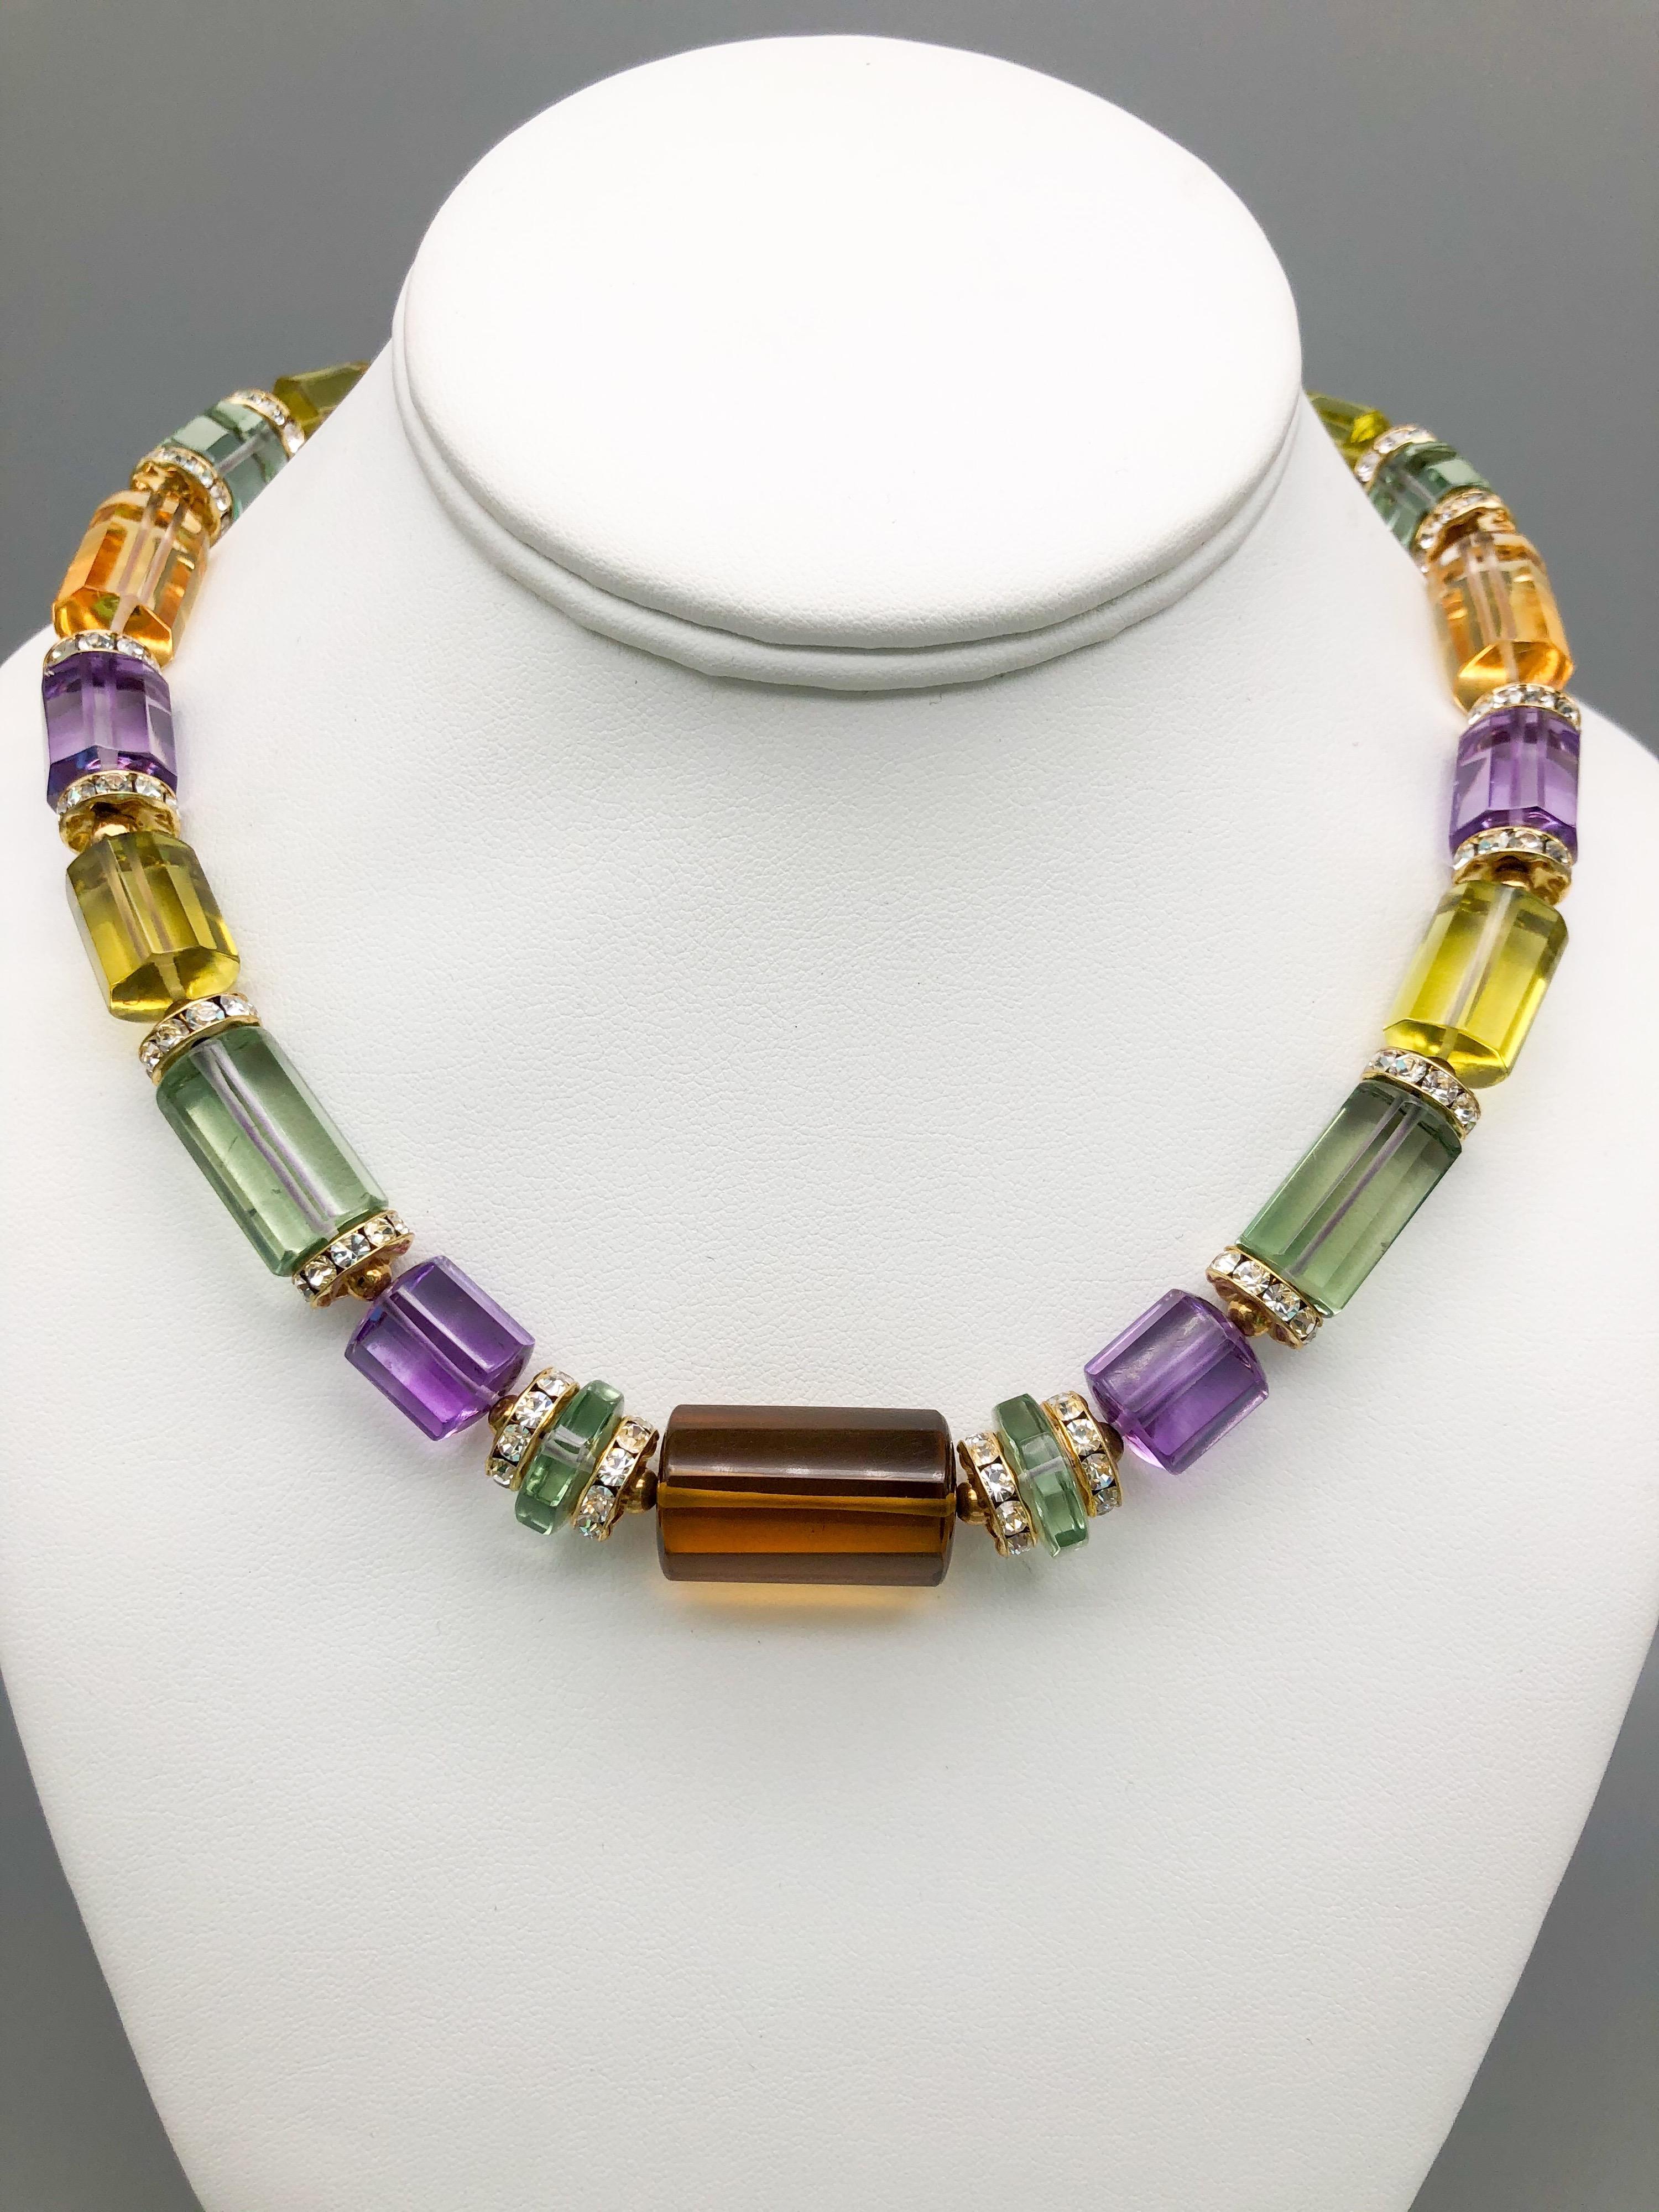 
One-of-a-Kind
Precious stone rainbow necklace.
Smoky Quartz, Purple Amethyst, Green Amethyst, Citrine are combined in this elegant necklace in matching cylindrical cuts separated elegant slim rondels for just a touch of sparkle with the surprise of